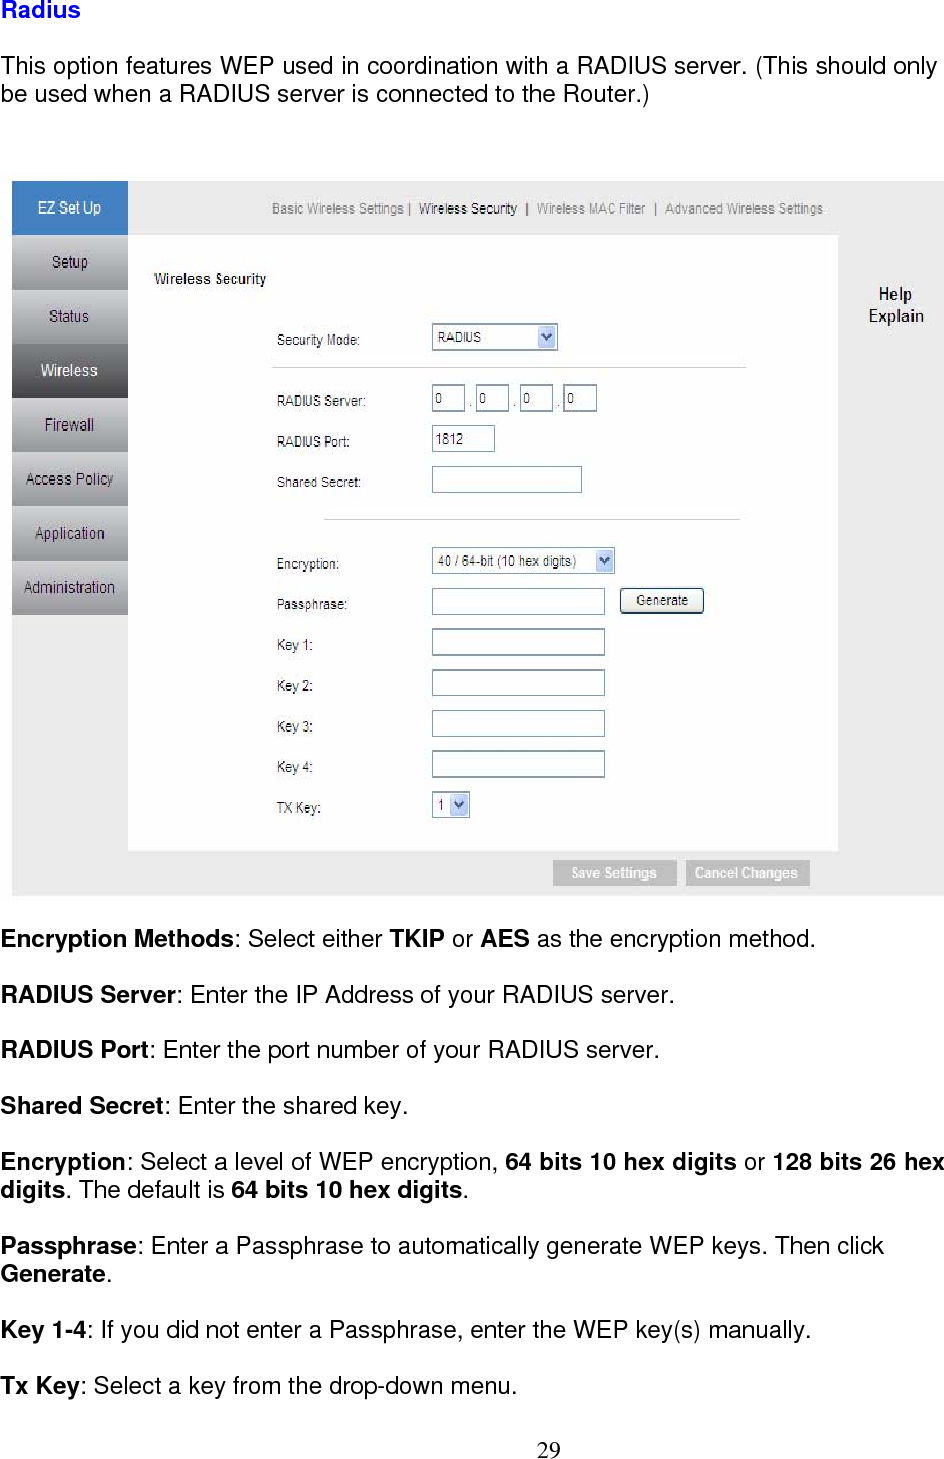  29Radius This option features WEP used in coordination with a RADIUS server. (This should only  be used when a RADIUS server is connected to the Router.)   Encryption Methods: Select either TKIP or AES as the encryption method.  RADIUS Server: Enter the IP Address of your RADIUS server. RADIUS Port: Enter the port number of your RADIUS server. Shared Secret: Enter the shared key. Encryption: Select a level of WEP encryption, 64 bits 10 hex digits or 128 bits 26 hex digits. The default is 64 bits 10 hex digits.  Passphrase: Enter a Passphrase to automatically generate WEP keys. Then click  Generate.  Key 1-4: If you did not enter a Passphrase, enter the WEP key(s) manually. Tx Key: Select a key from the drop-down menu. 